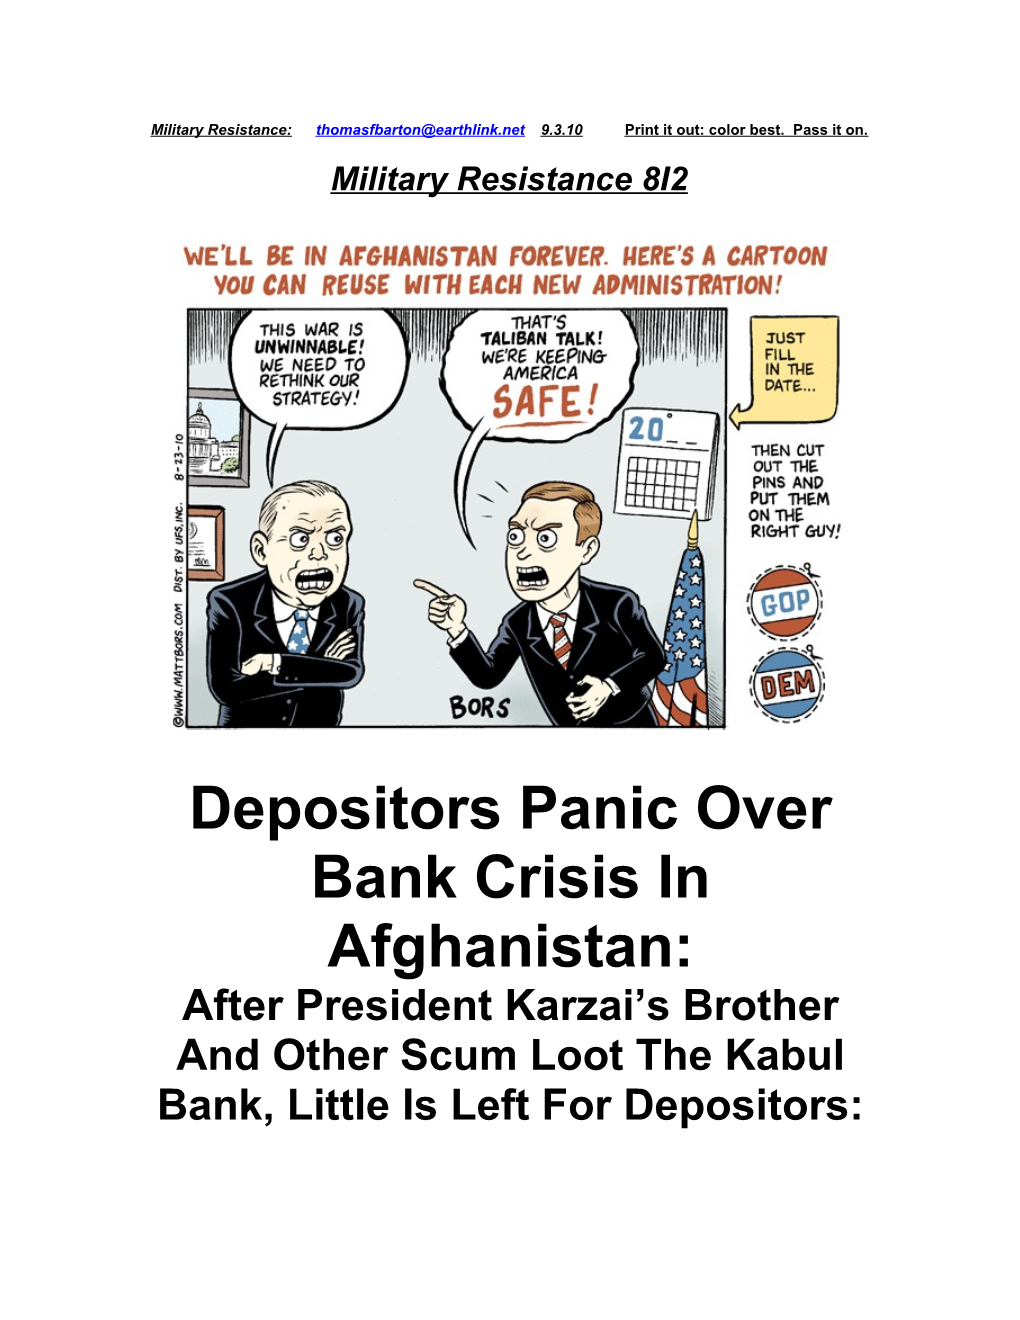 Depositors Panic Over Bank Crisis in Afghanistan